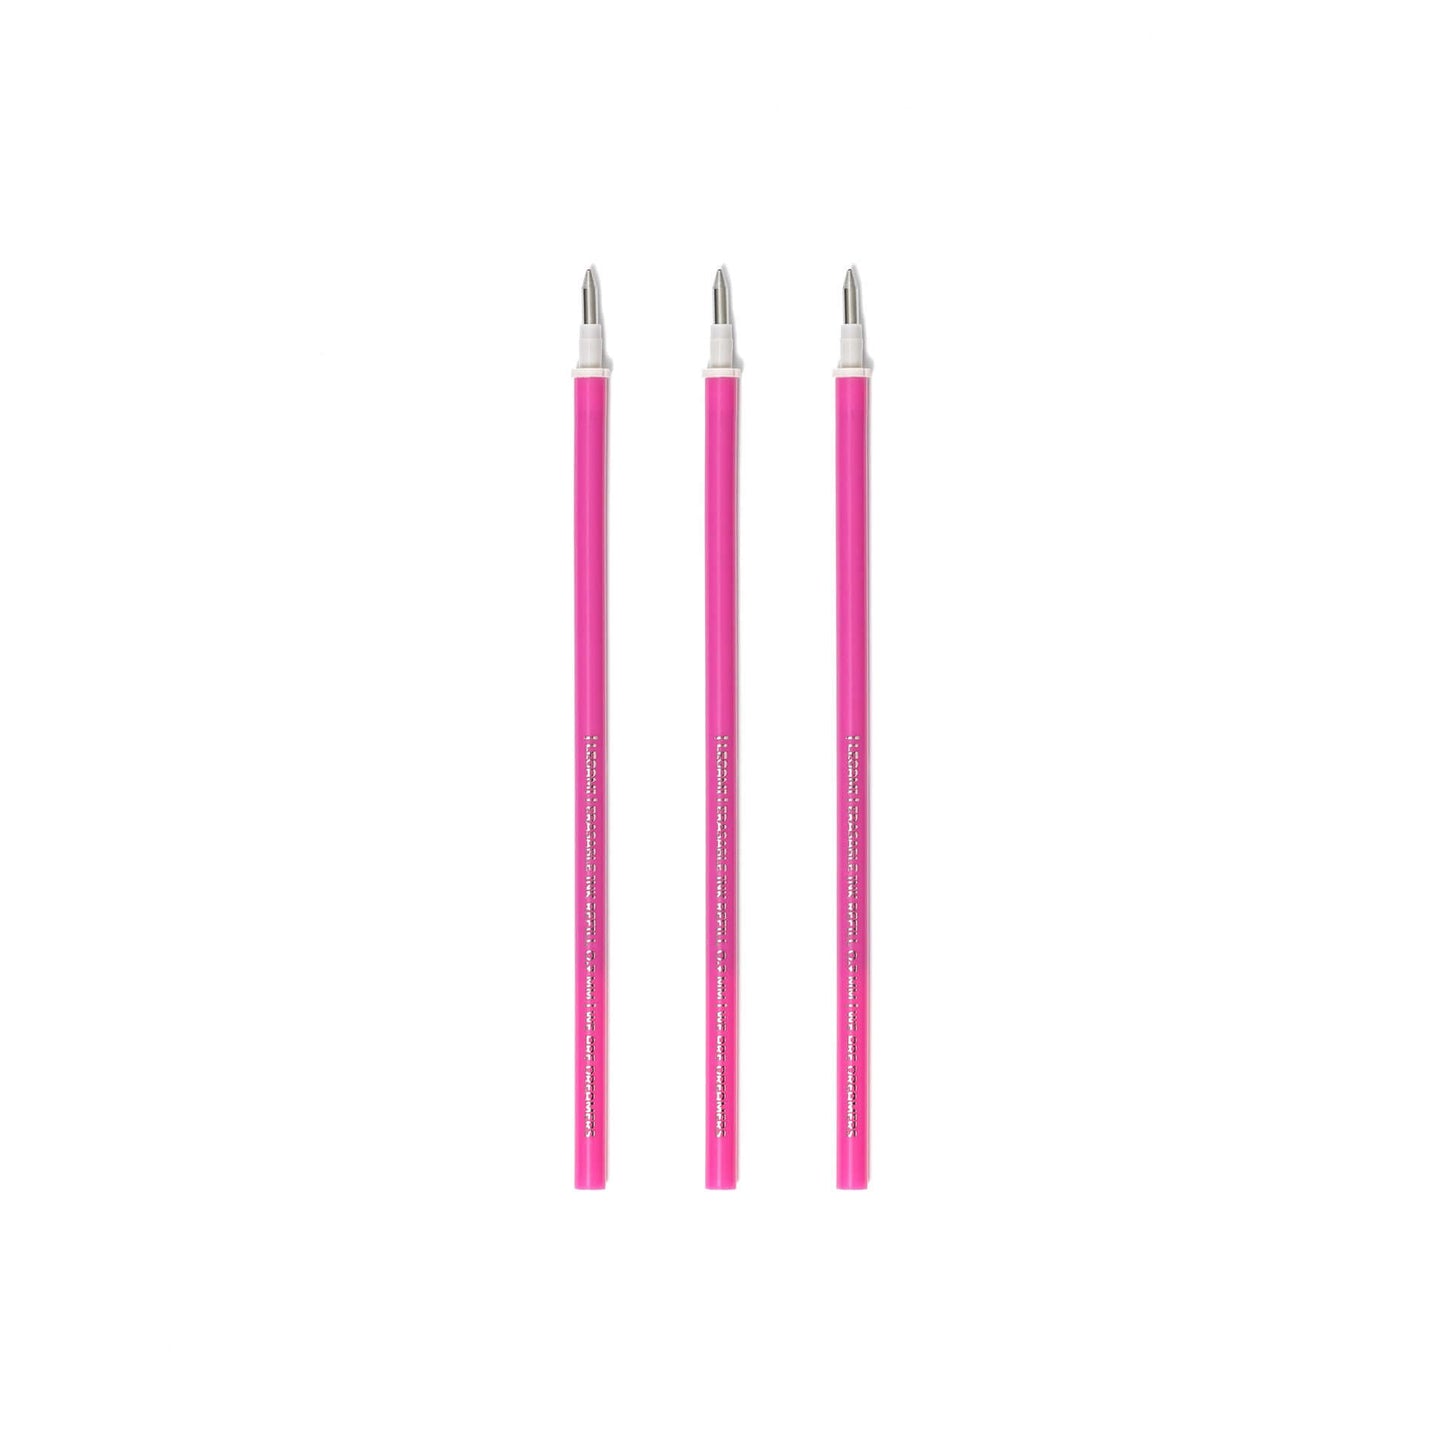 3 Pink Legami Erasable Pen Refills without packaging